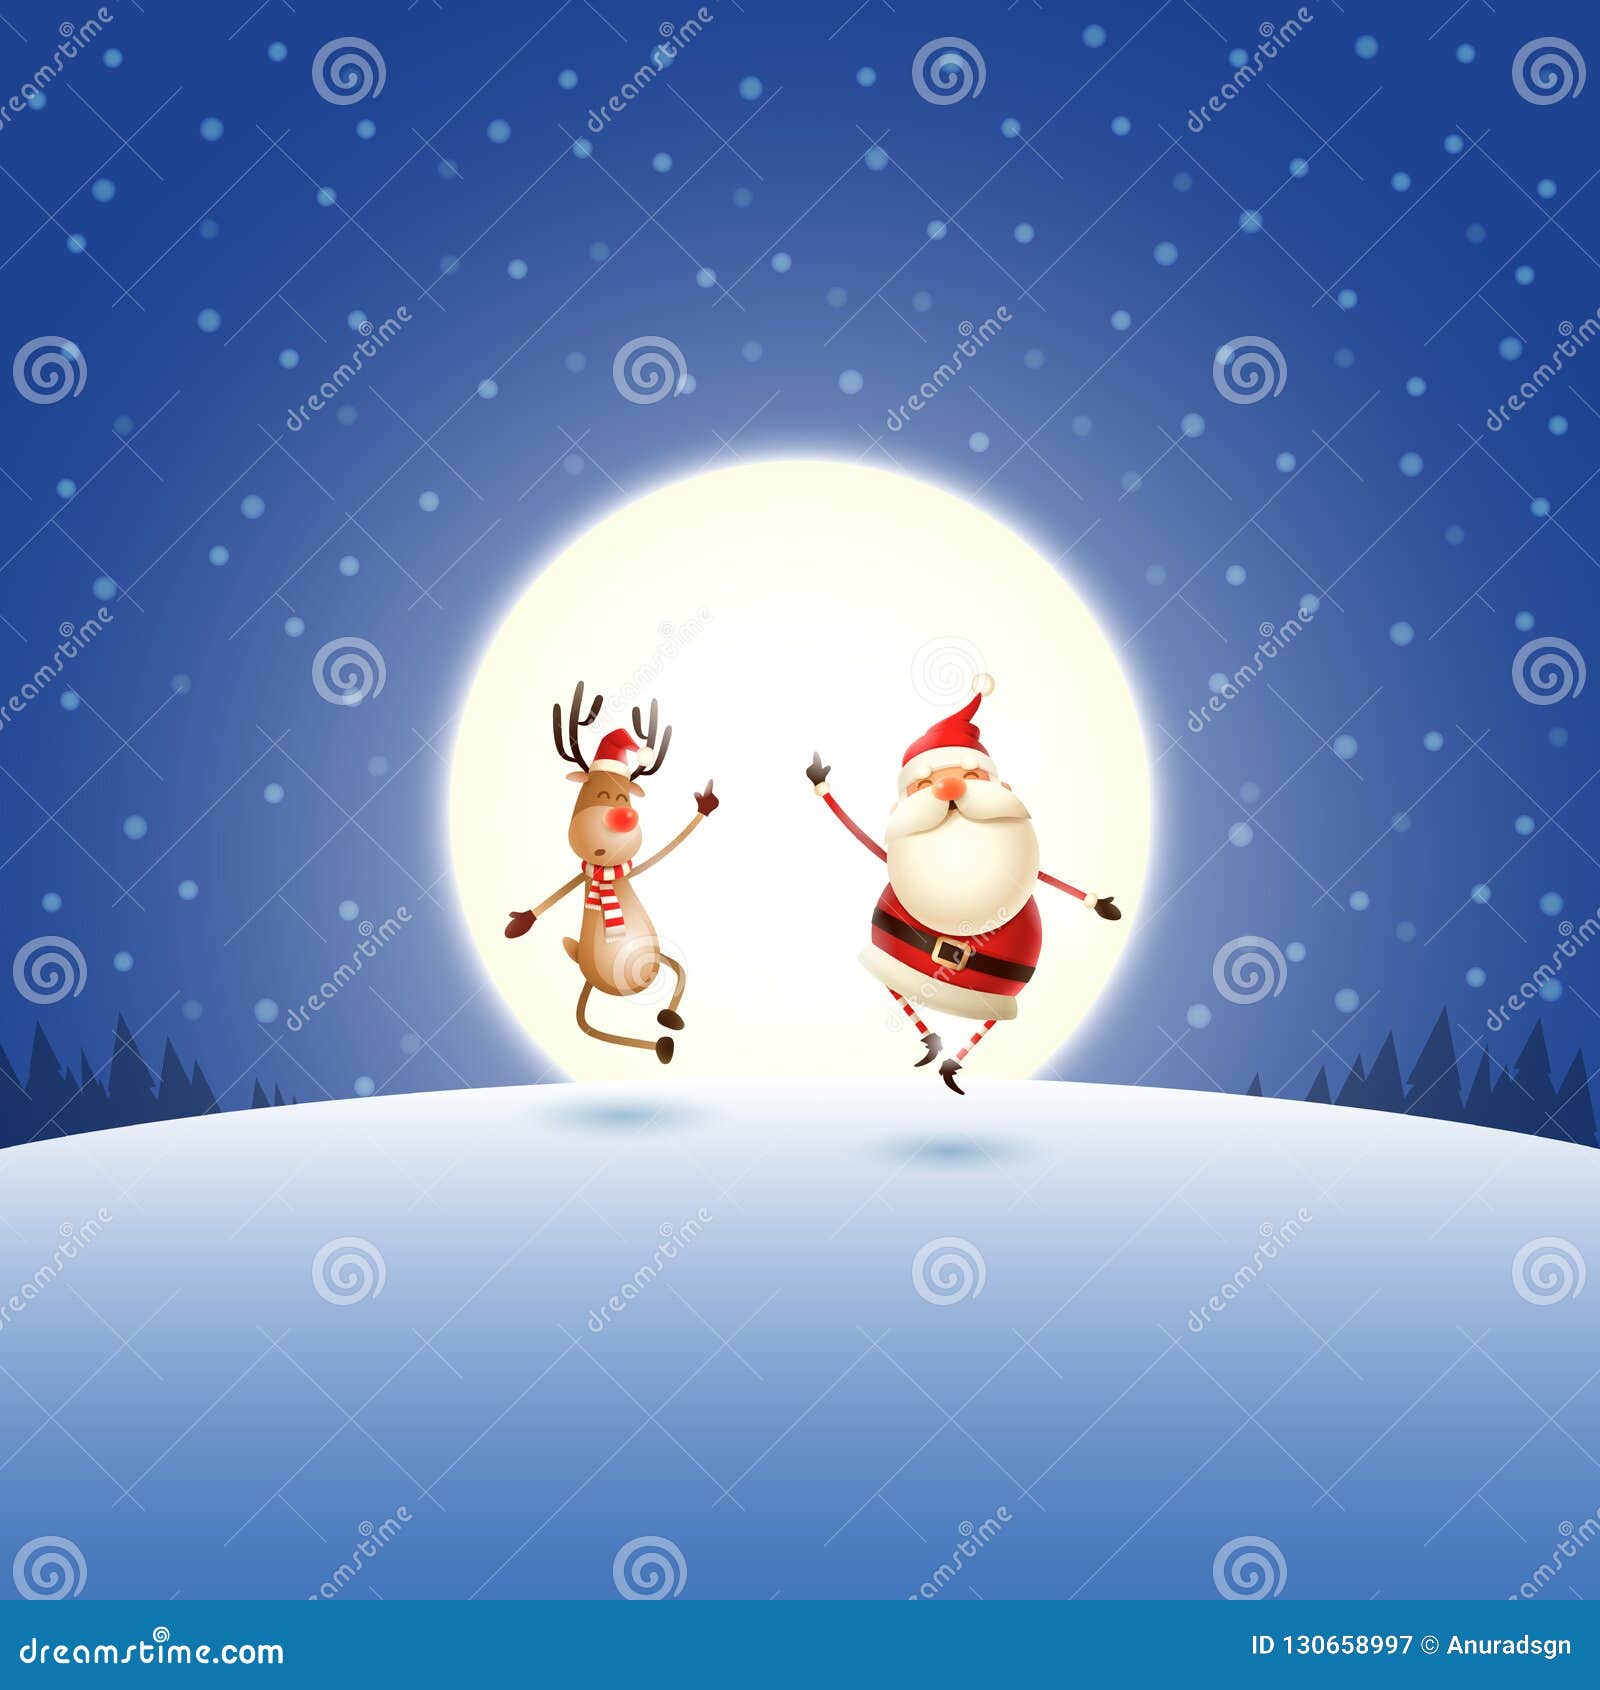 happy expresion of santa claus and reindeer on blue night moonlight winter landscape